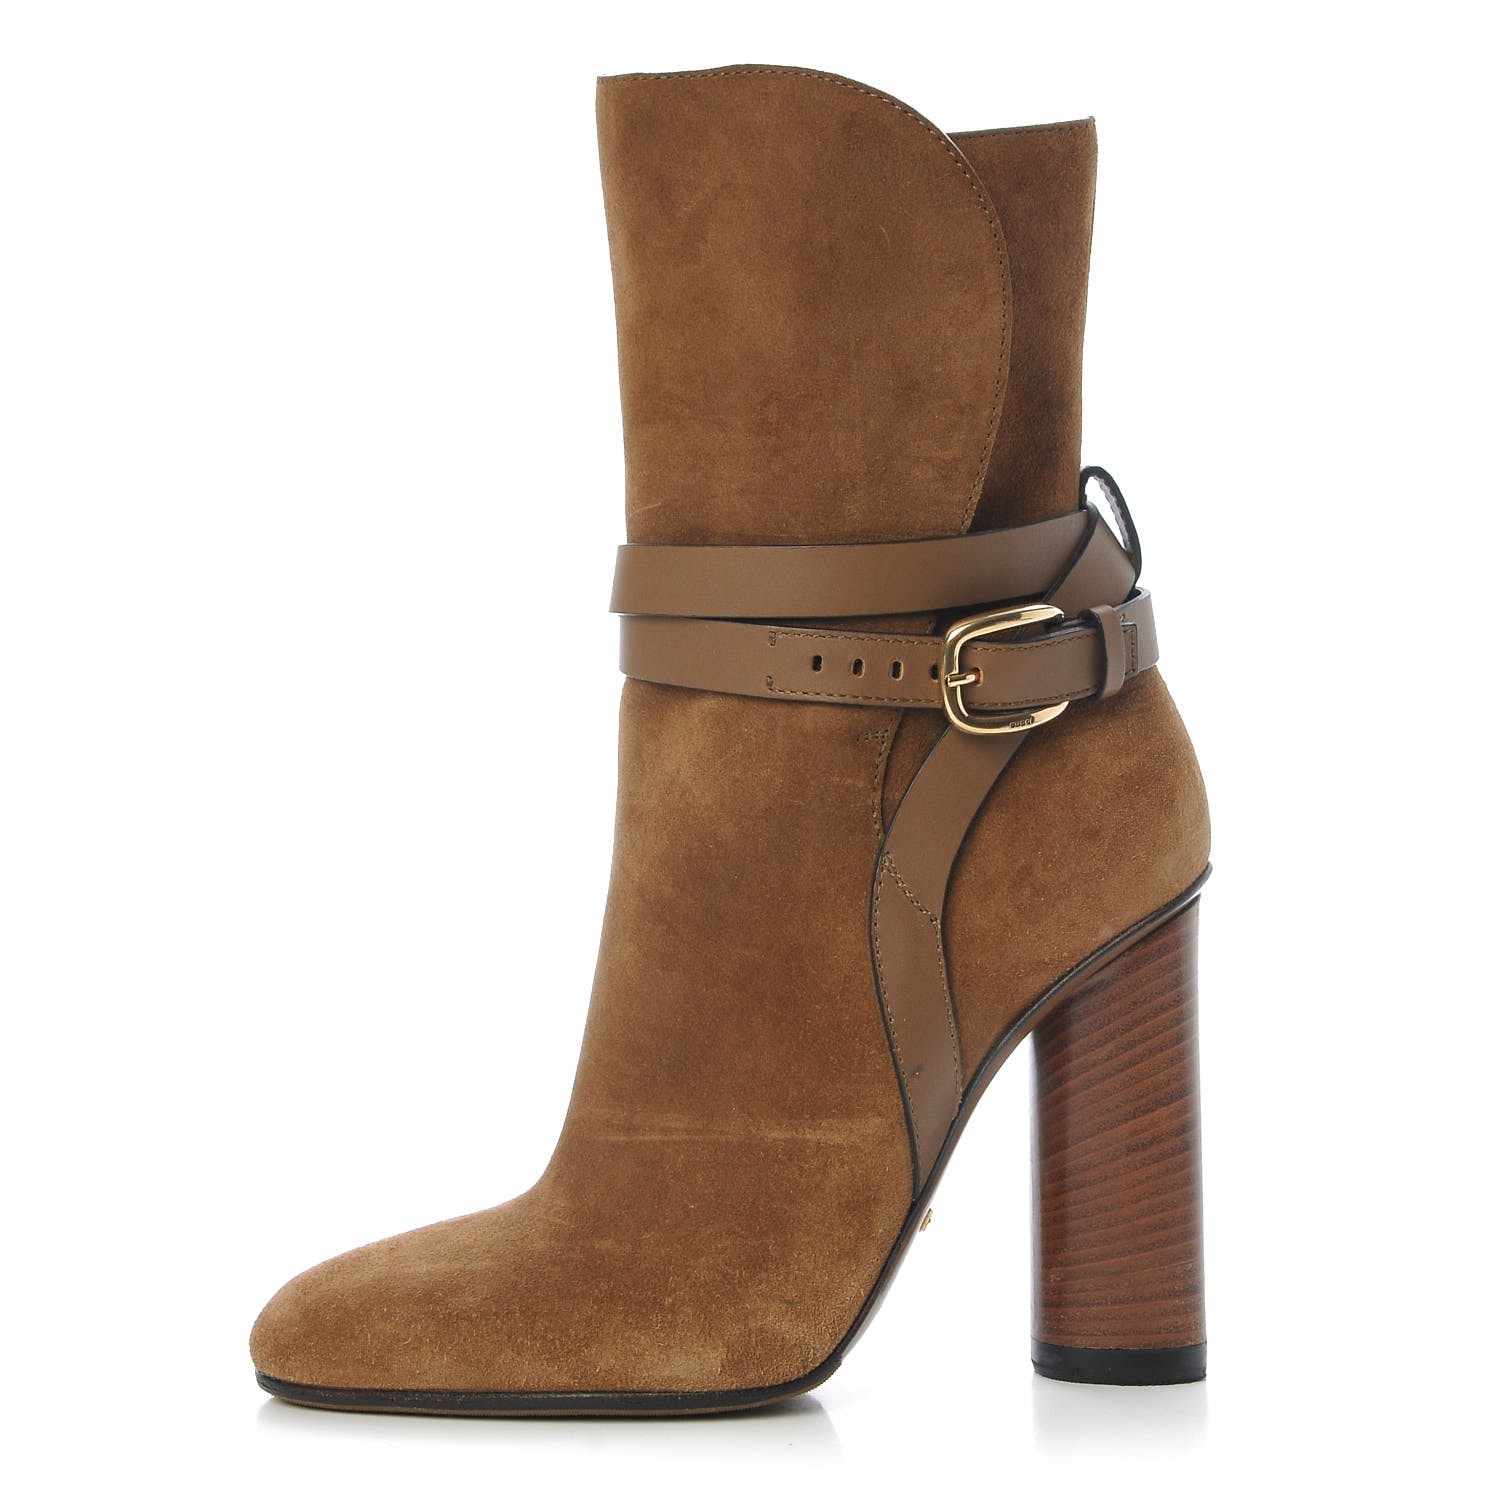 GUCCI Suede Abigail Ankle Boots 36.5 